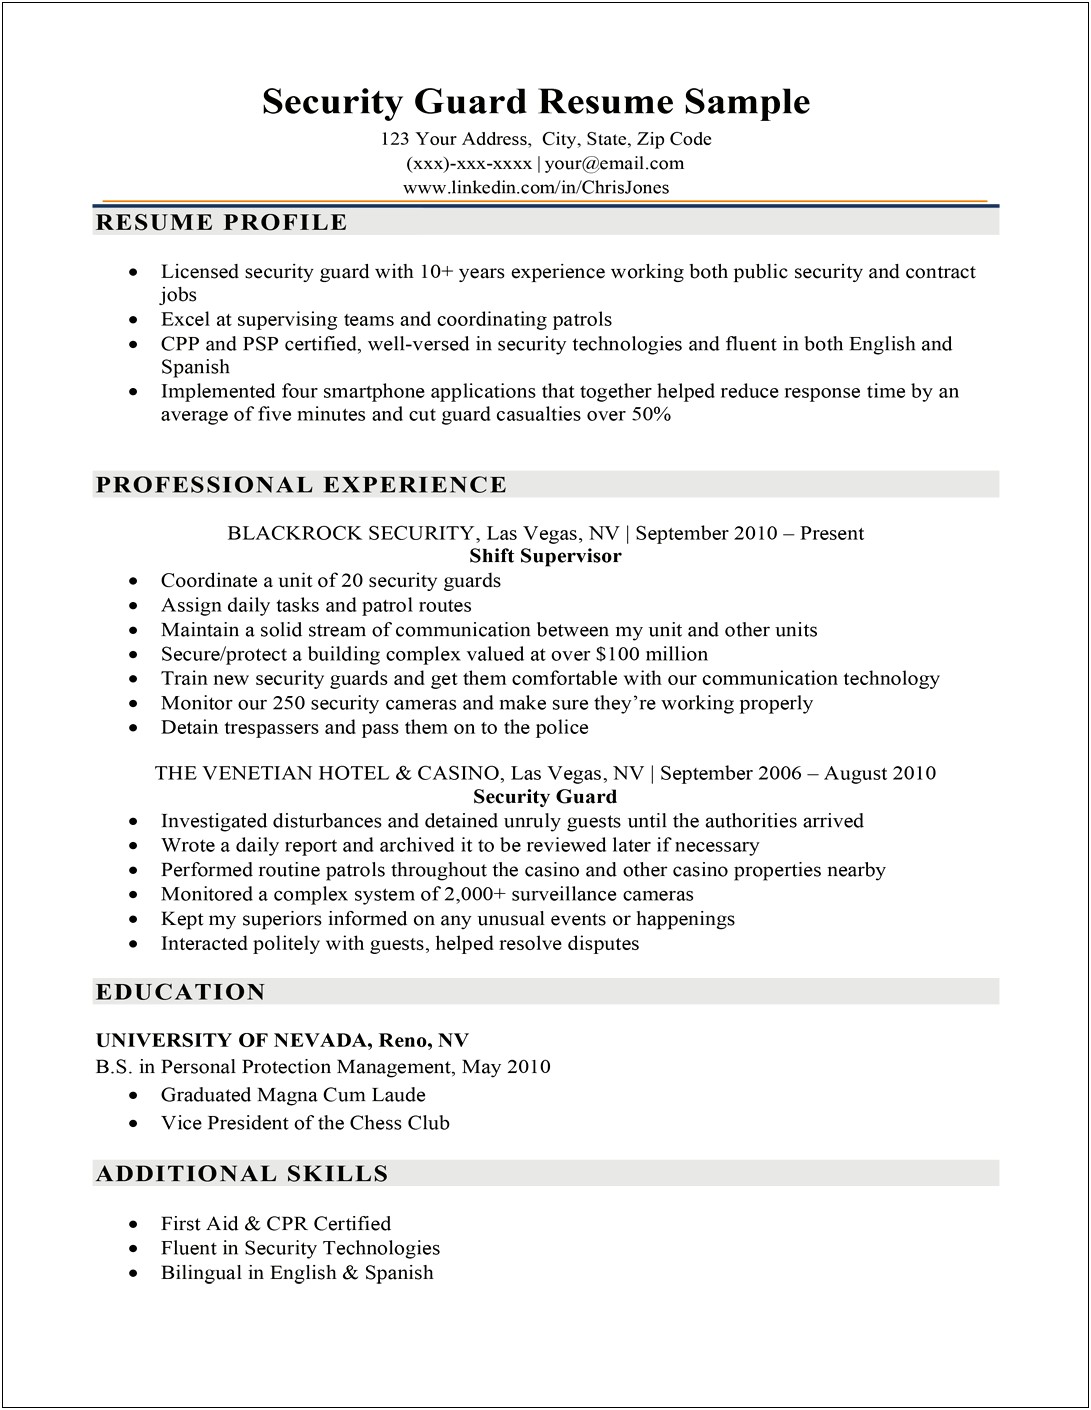 Resume Examples For Security Jobs